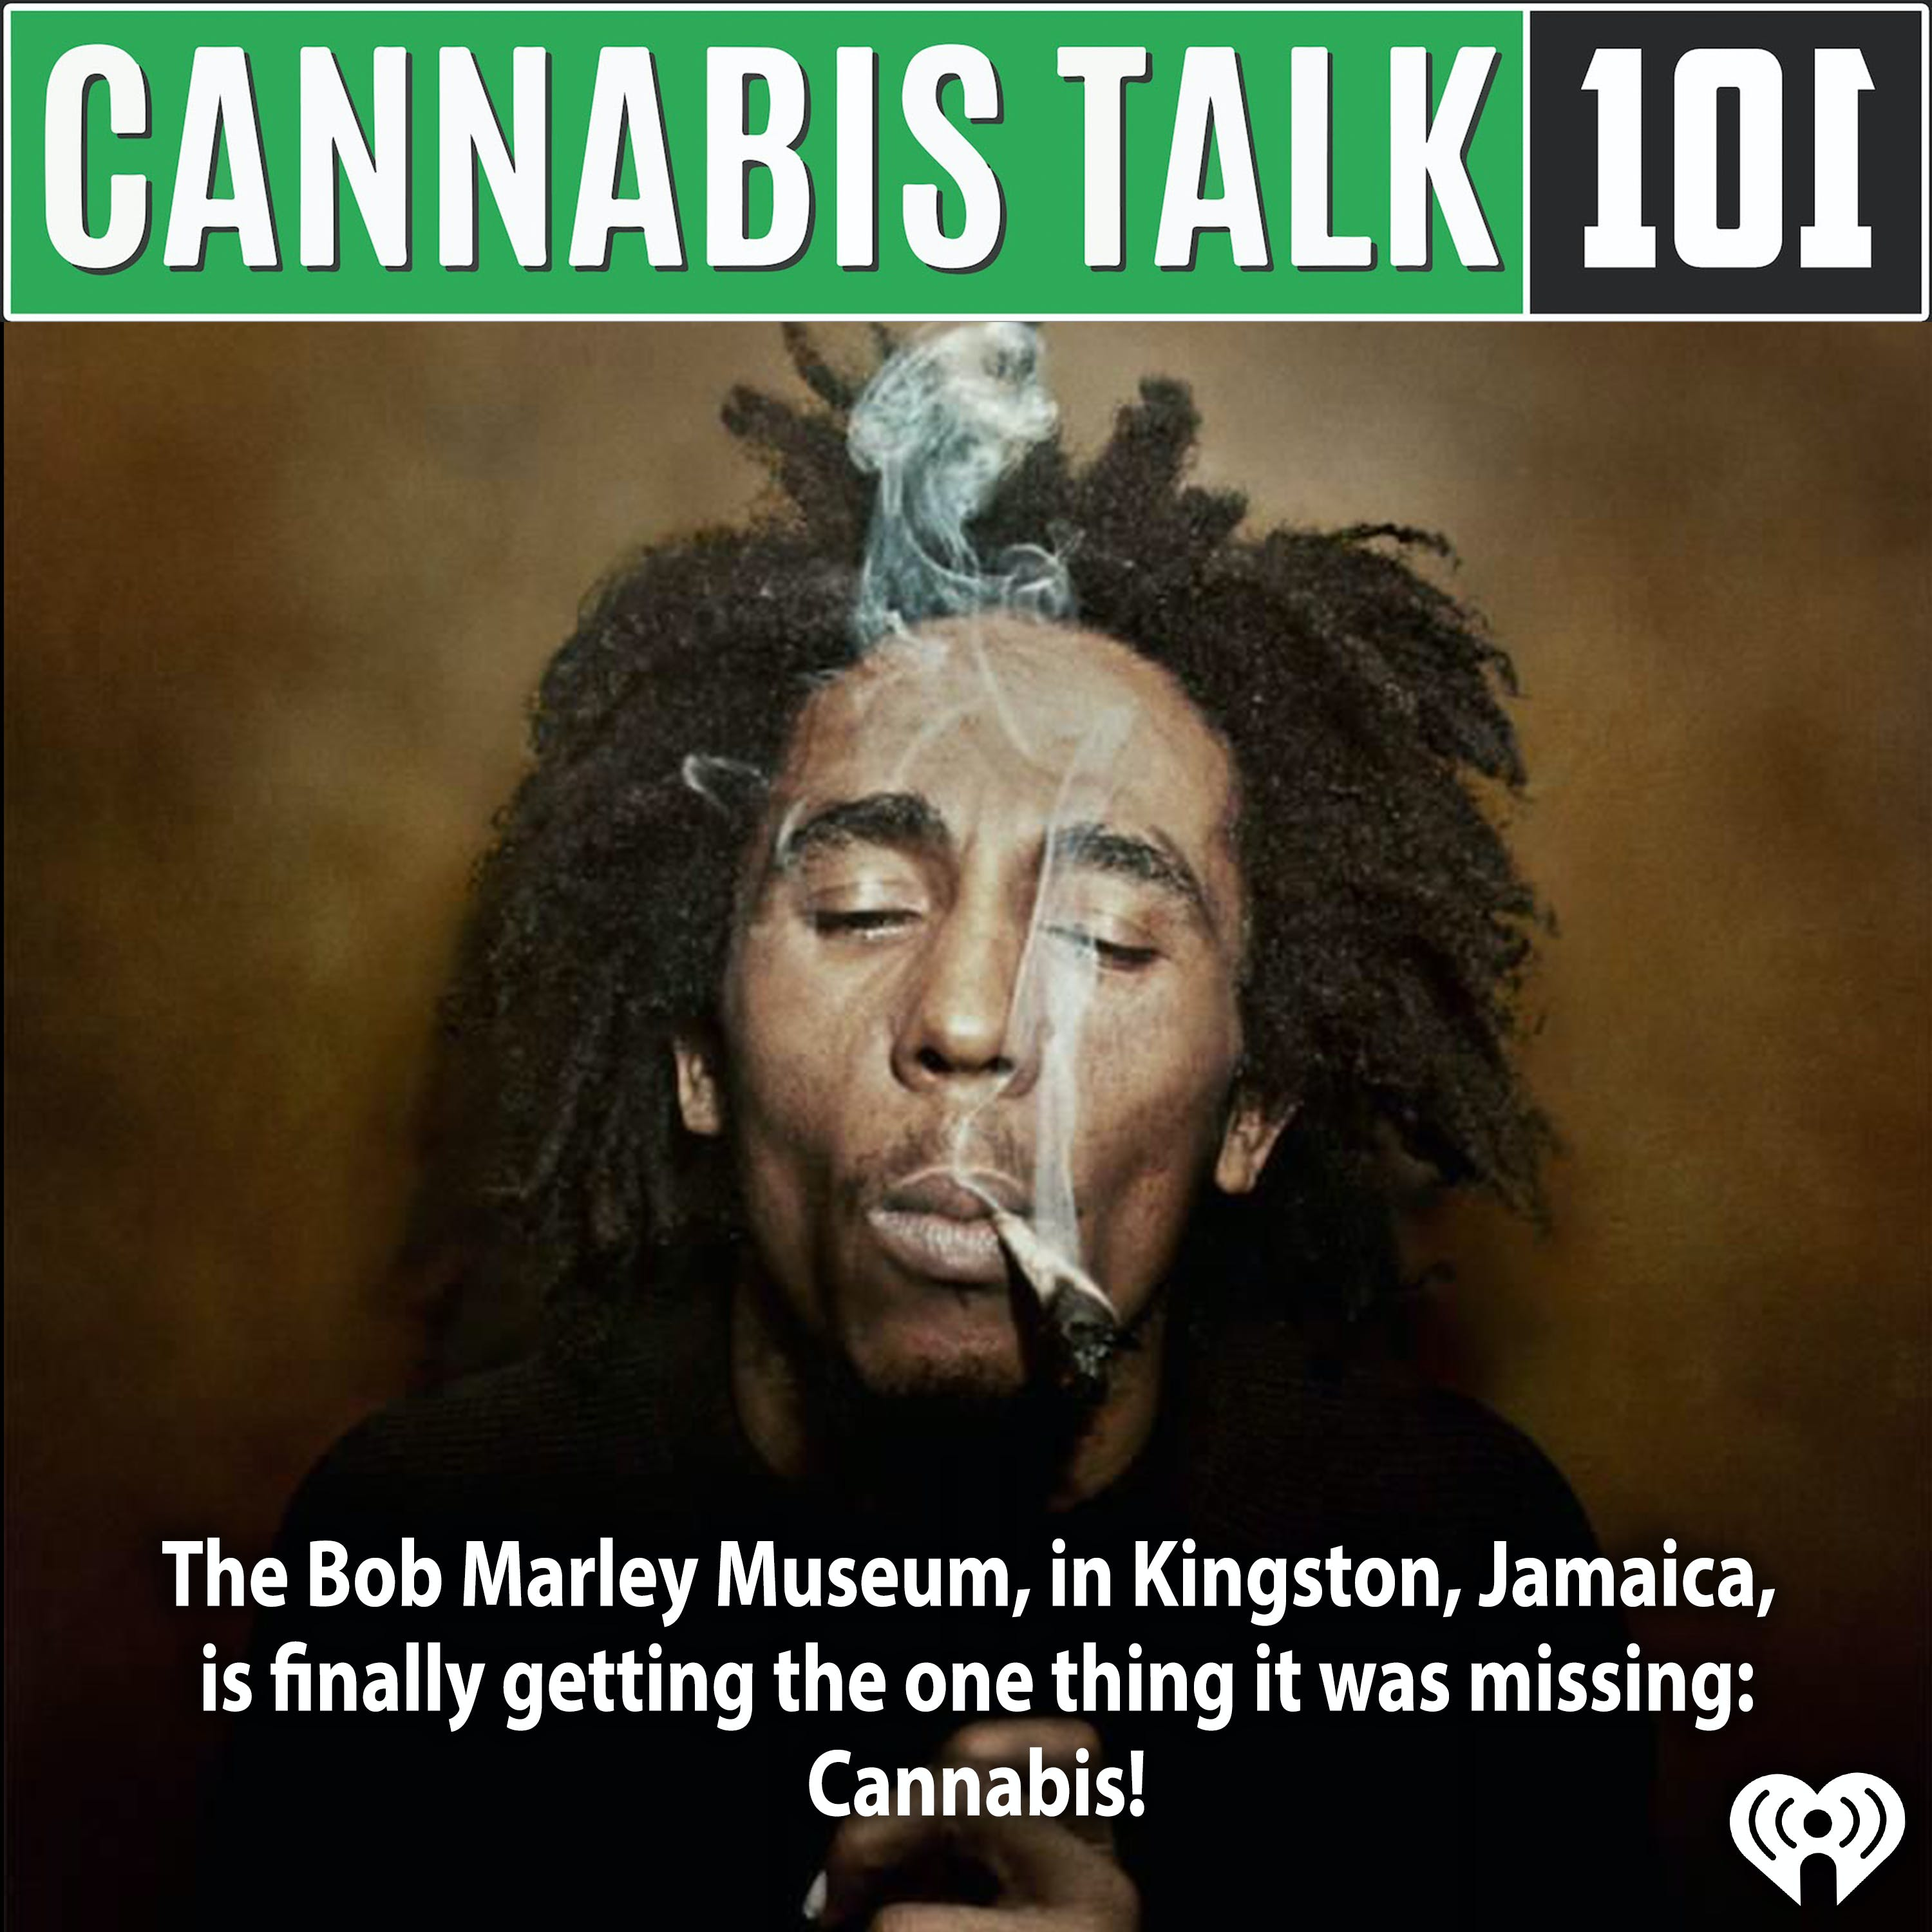 The Bob Marley Museum, in Kingston, Jamaica, is finally getting the one thing it was missing: Cannabis!